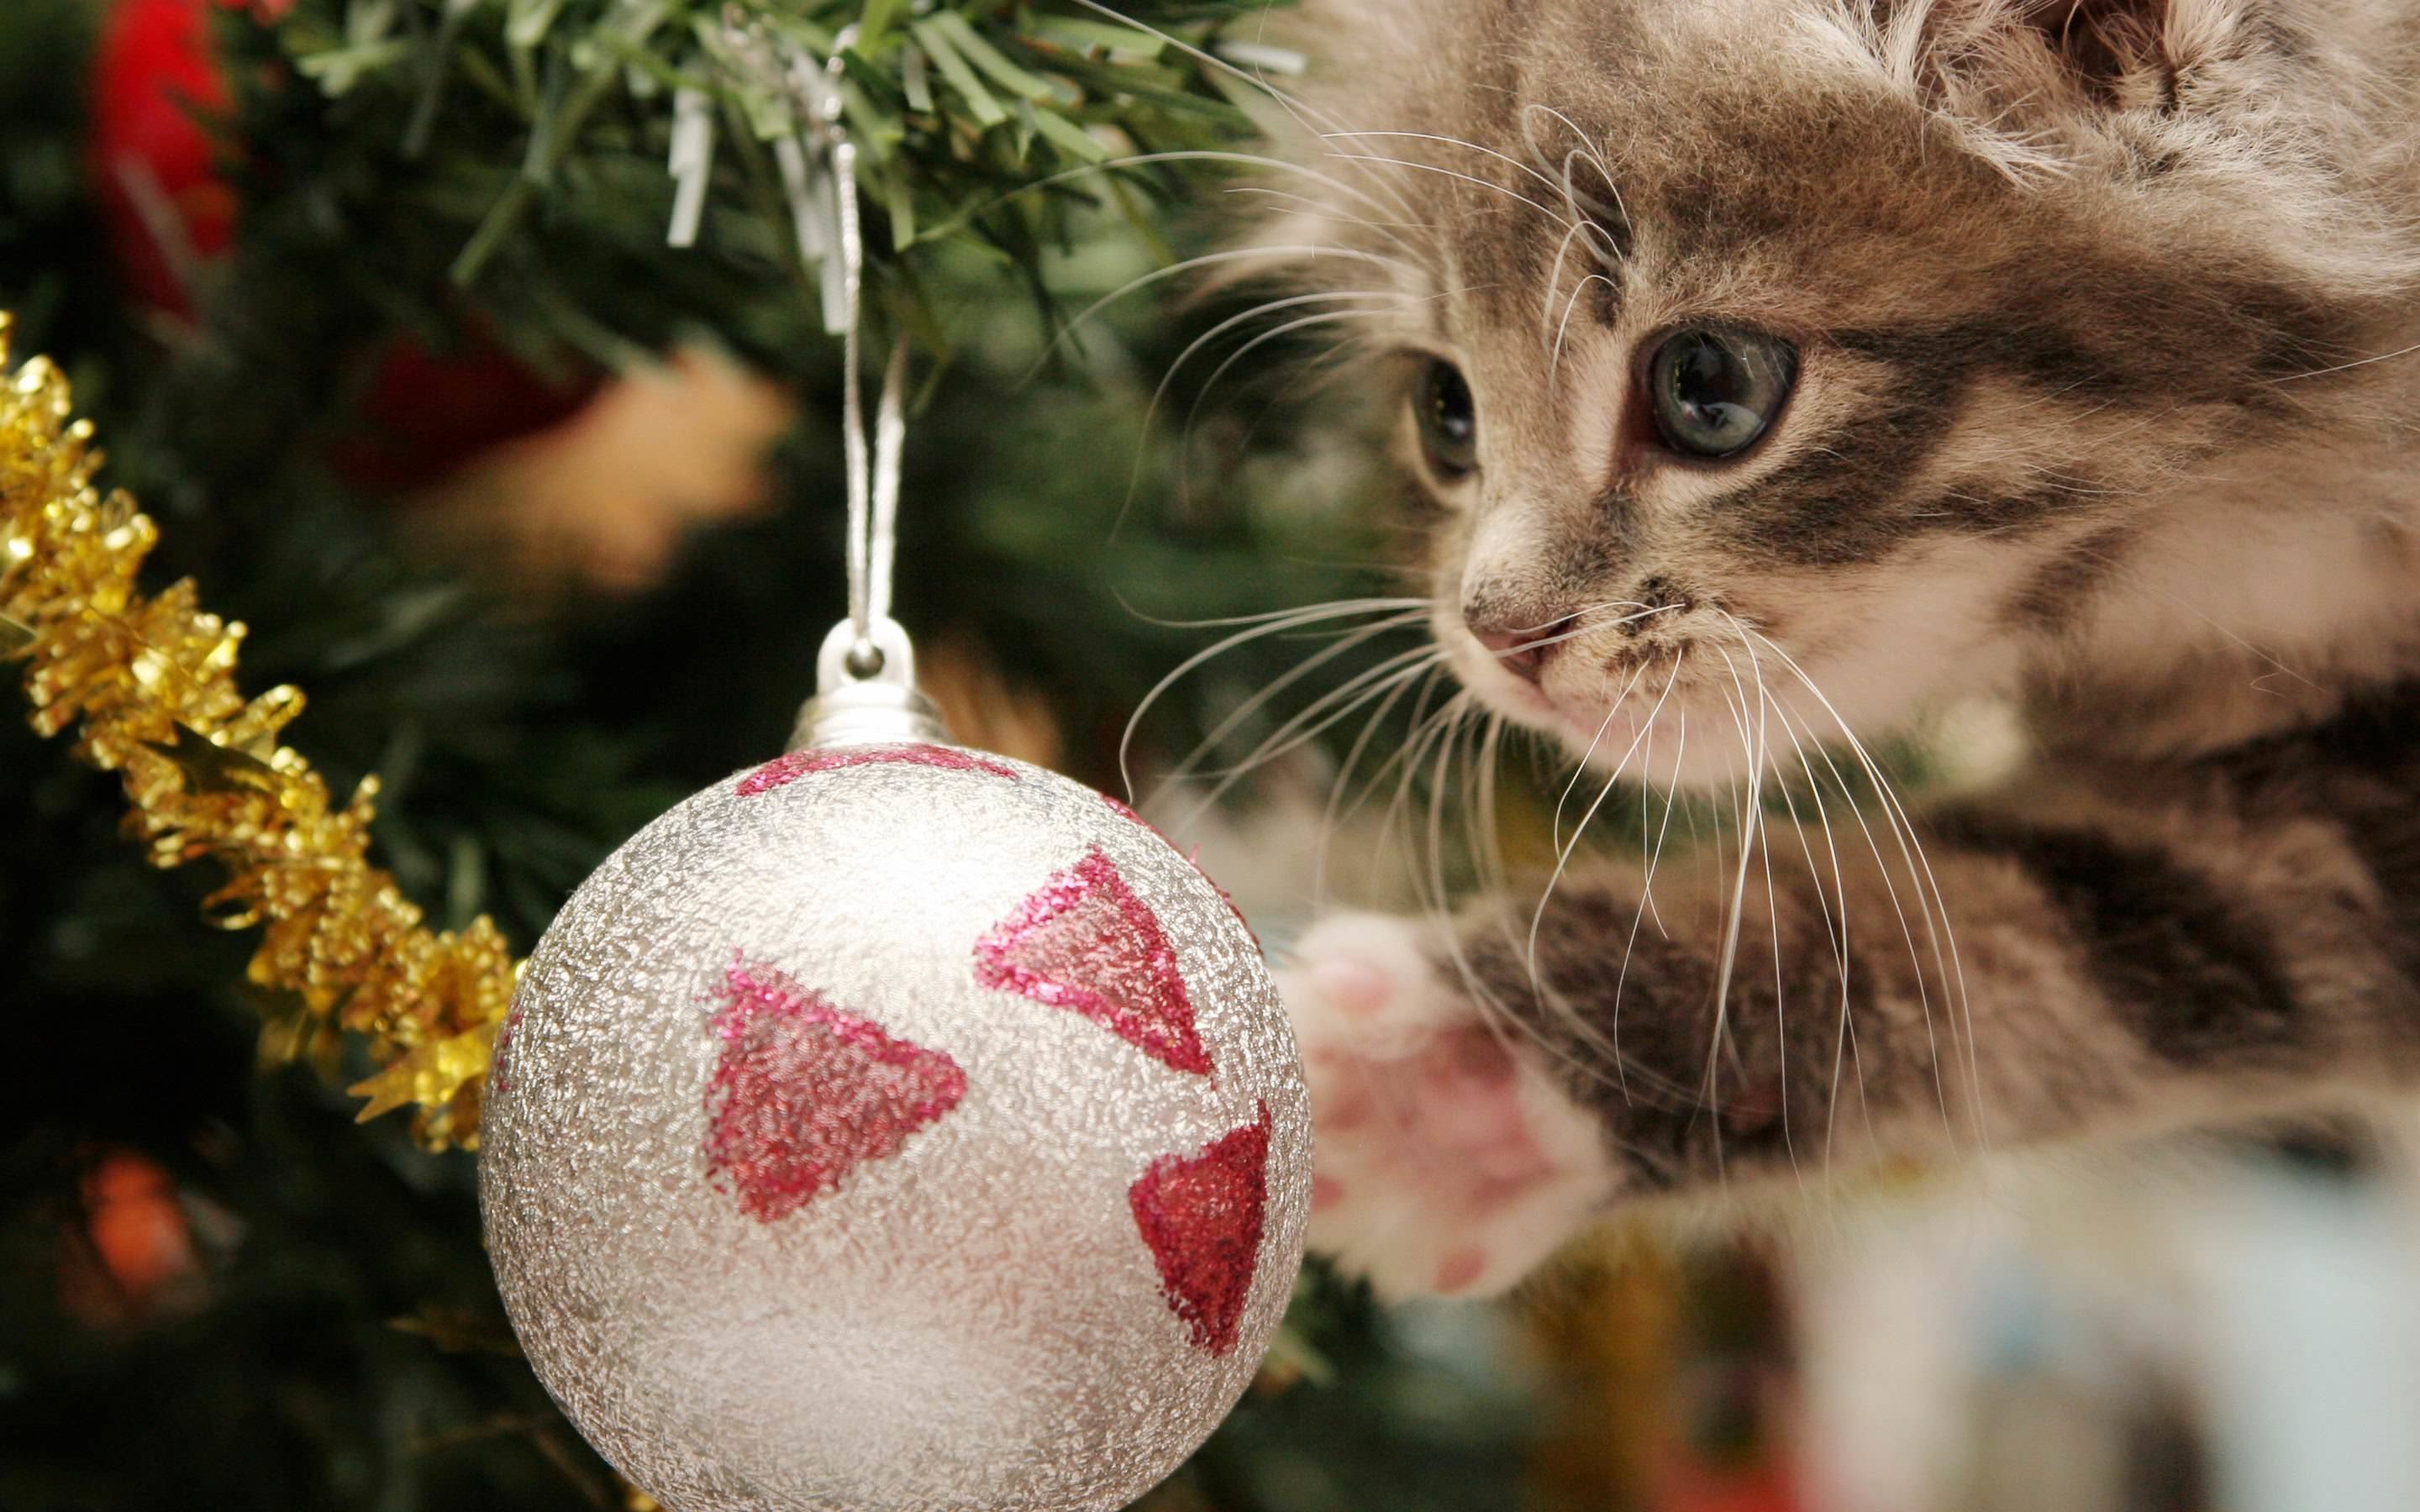 Kitten Playing With Christmas Ornaments Wallpaper for Desktop 2880x1800